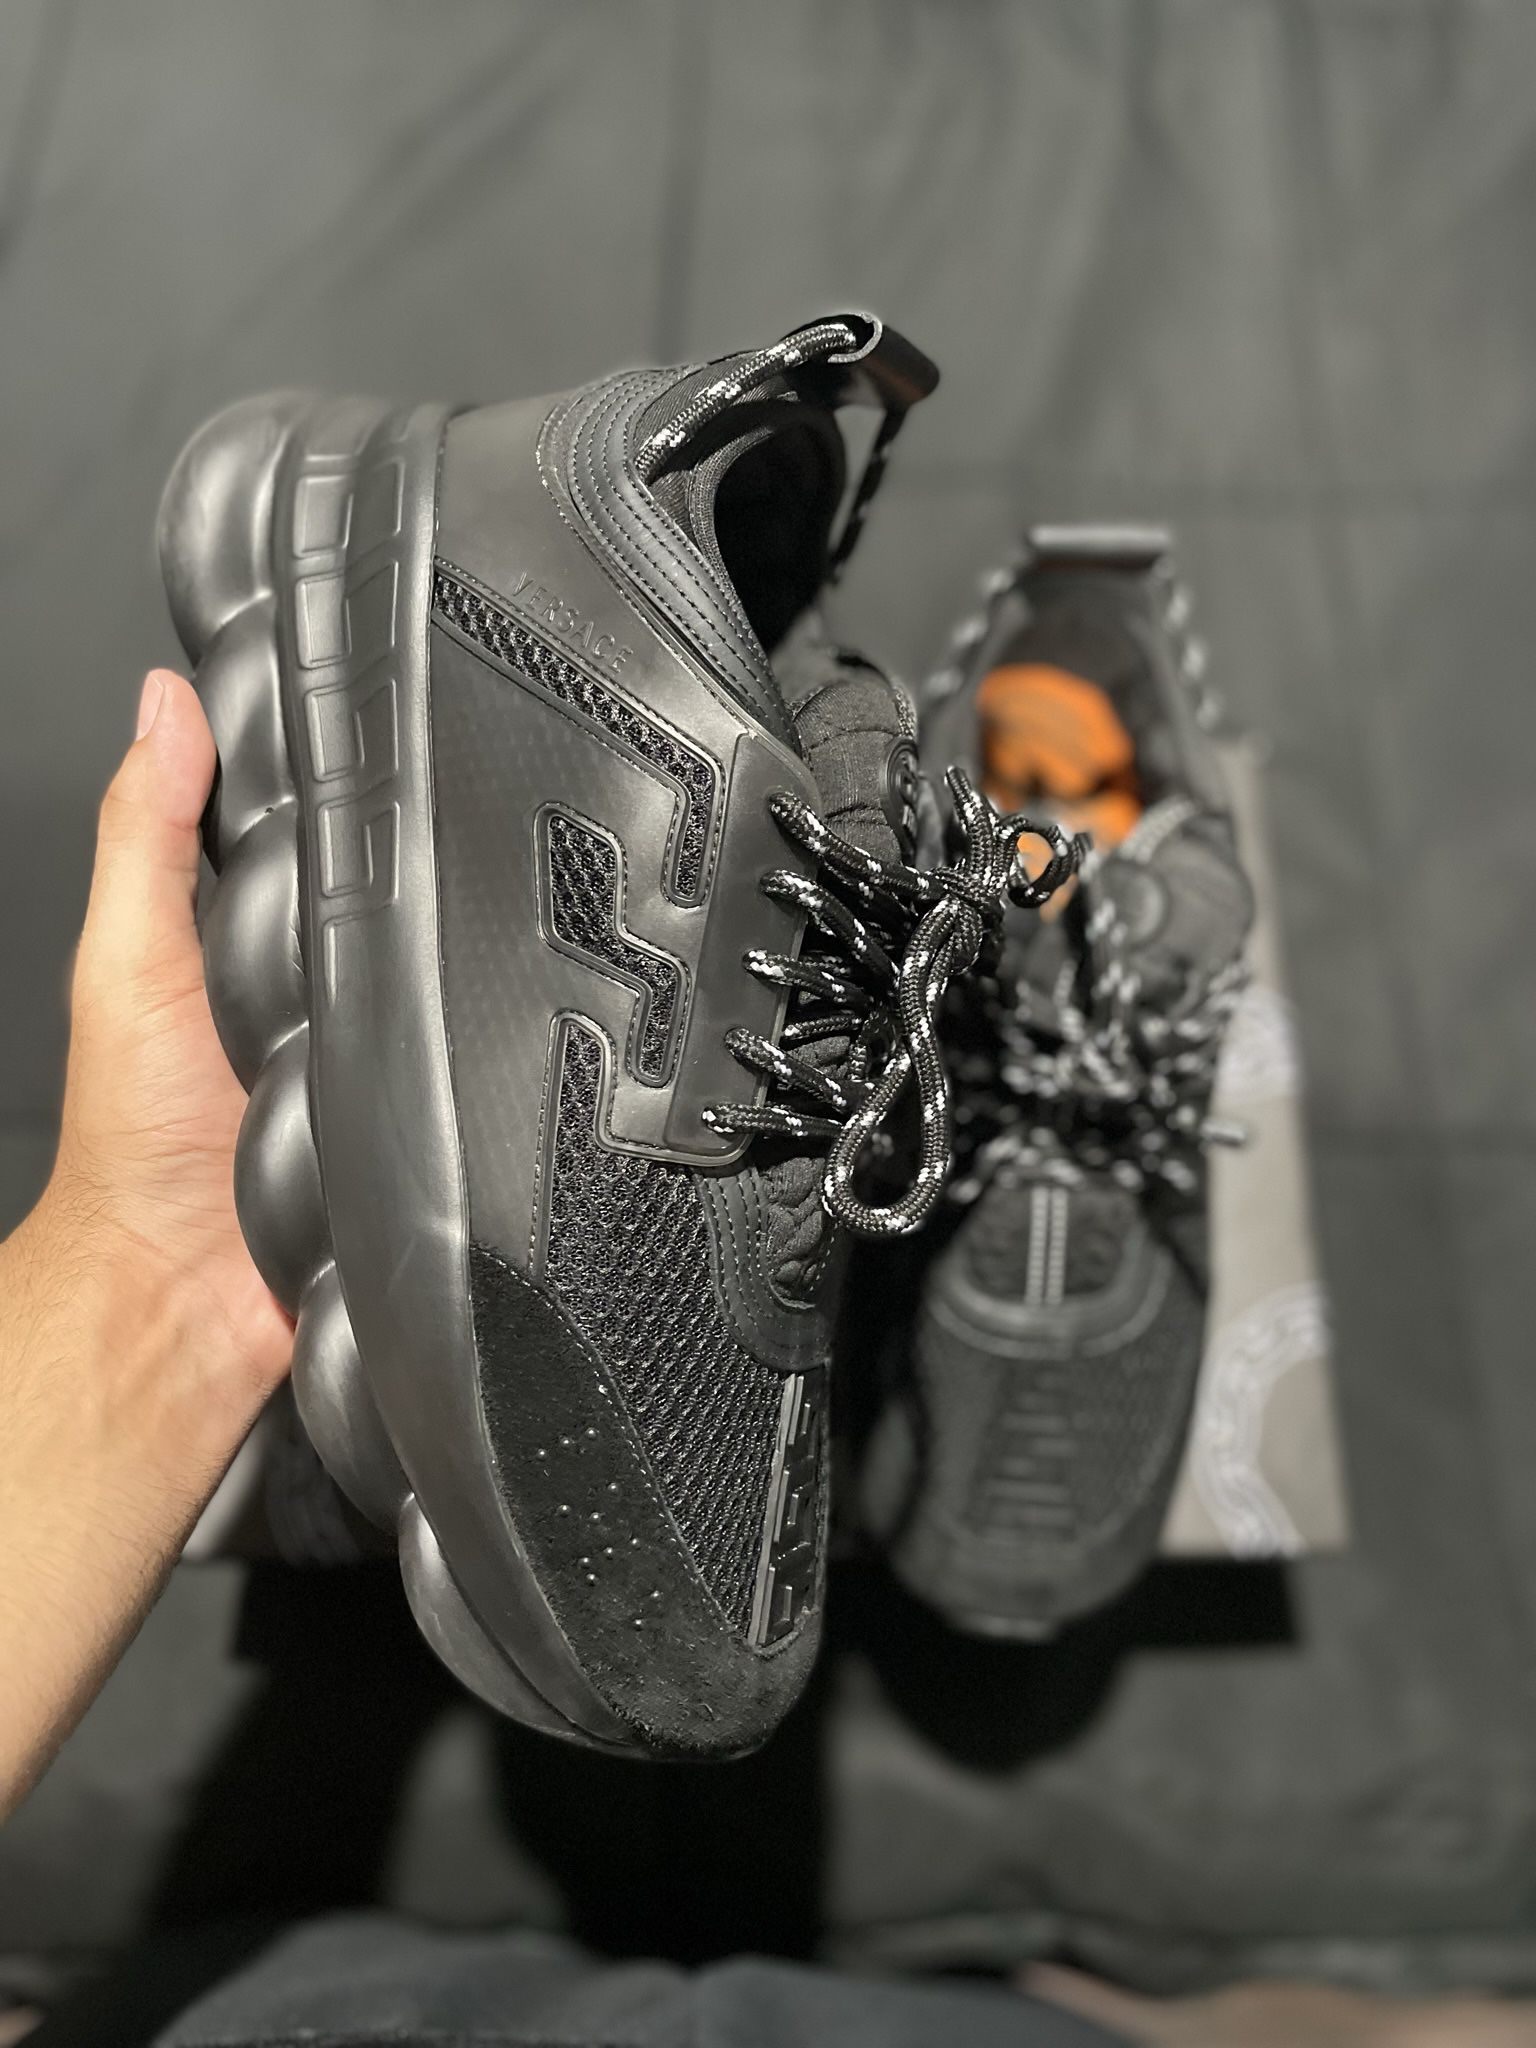 Versace Chain Reaction 'Triple Black' ( Review + Sizing ) 